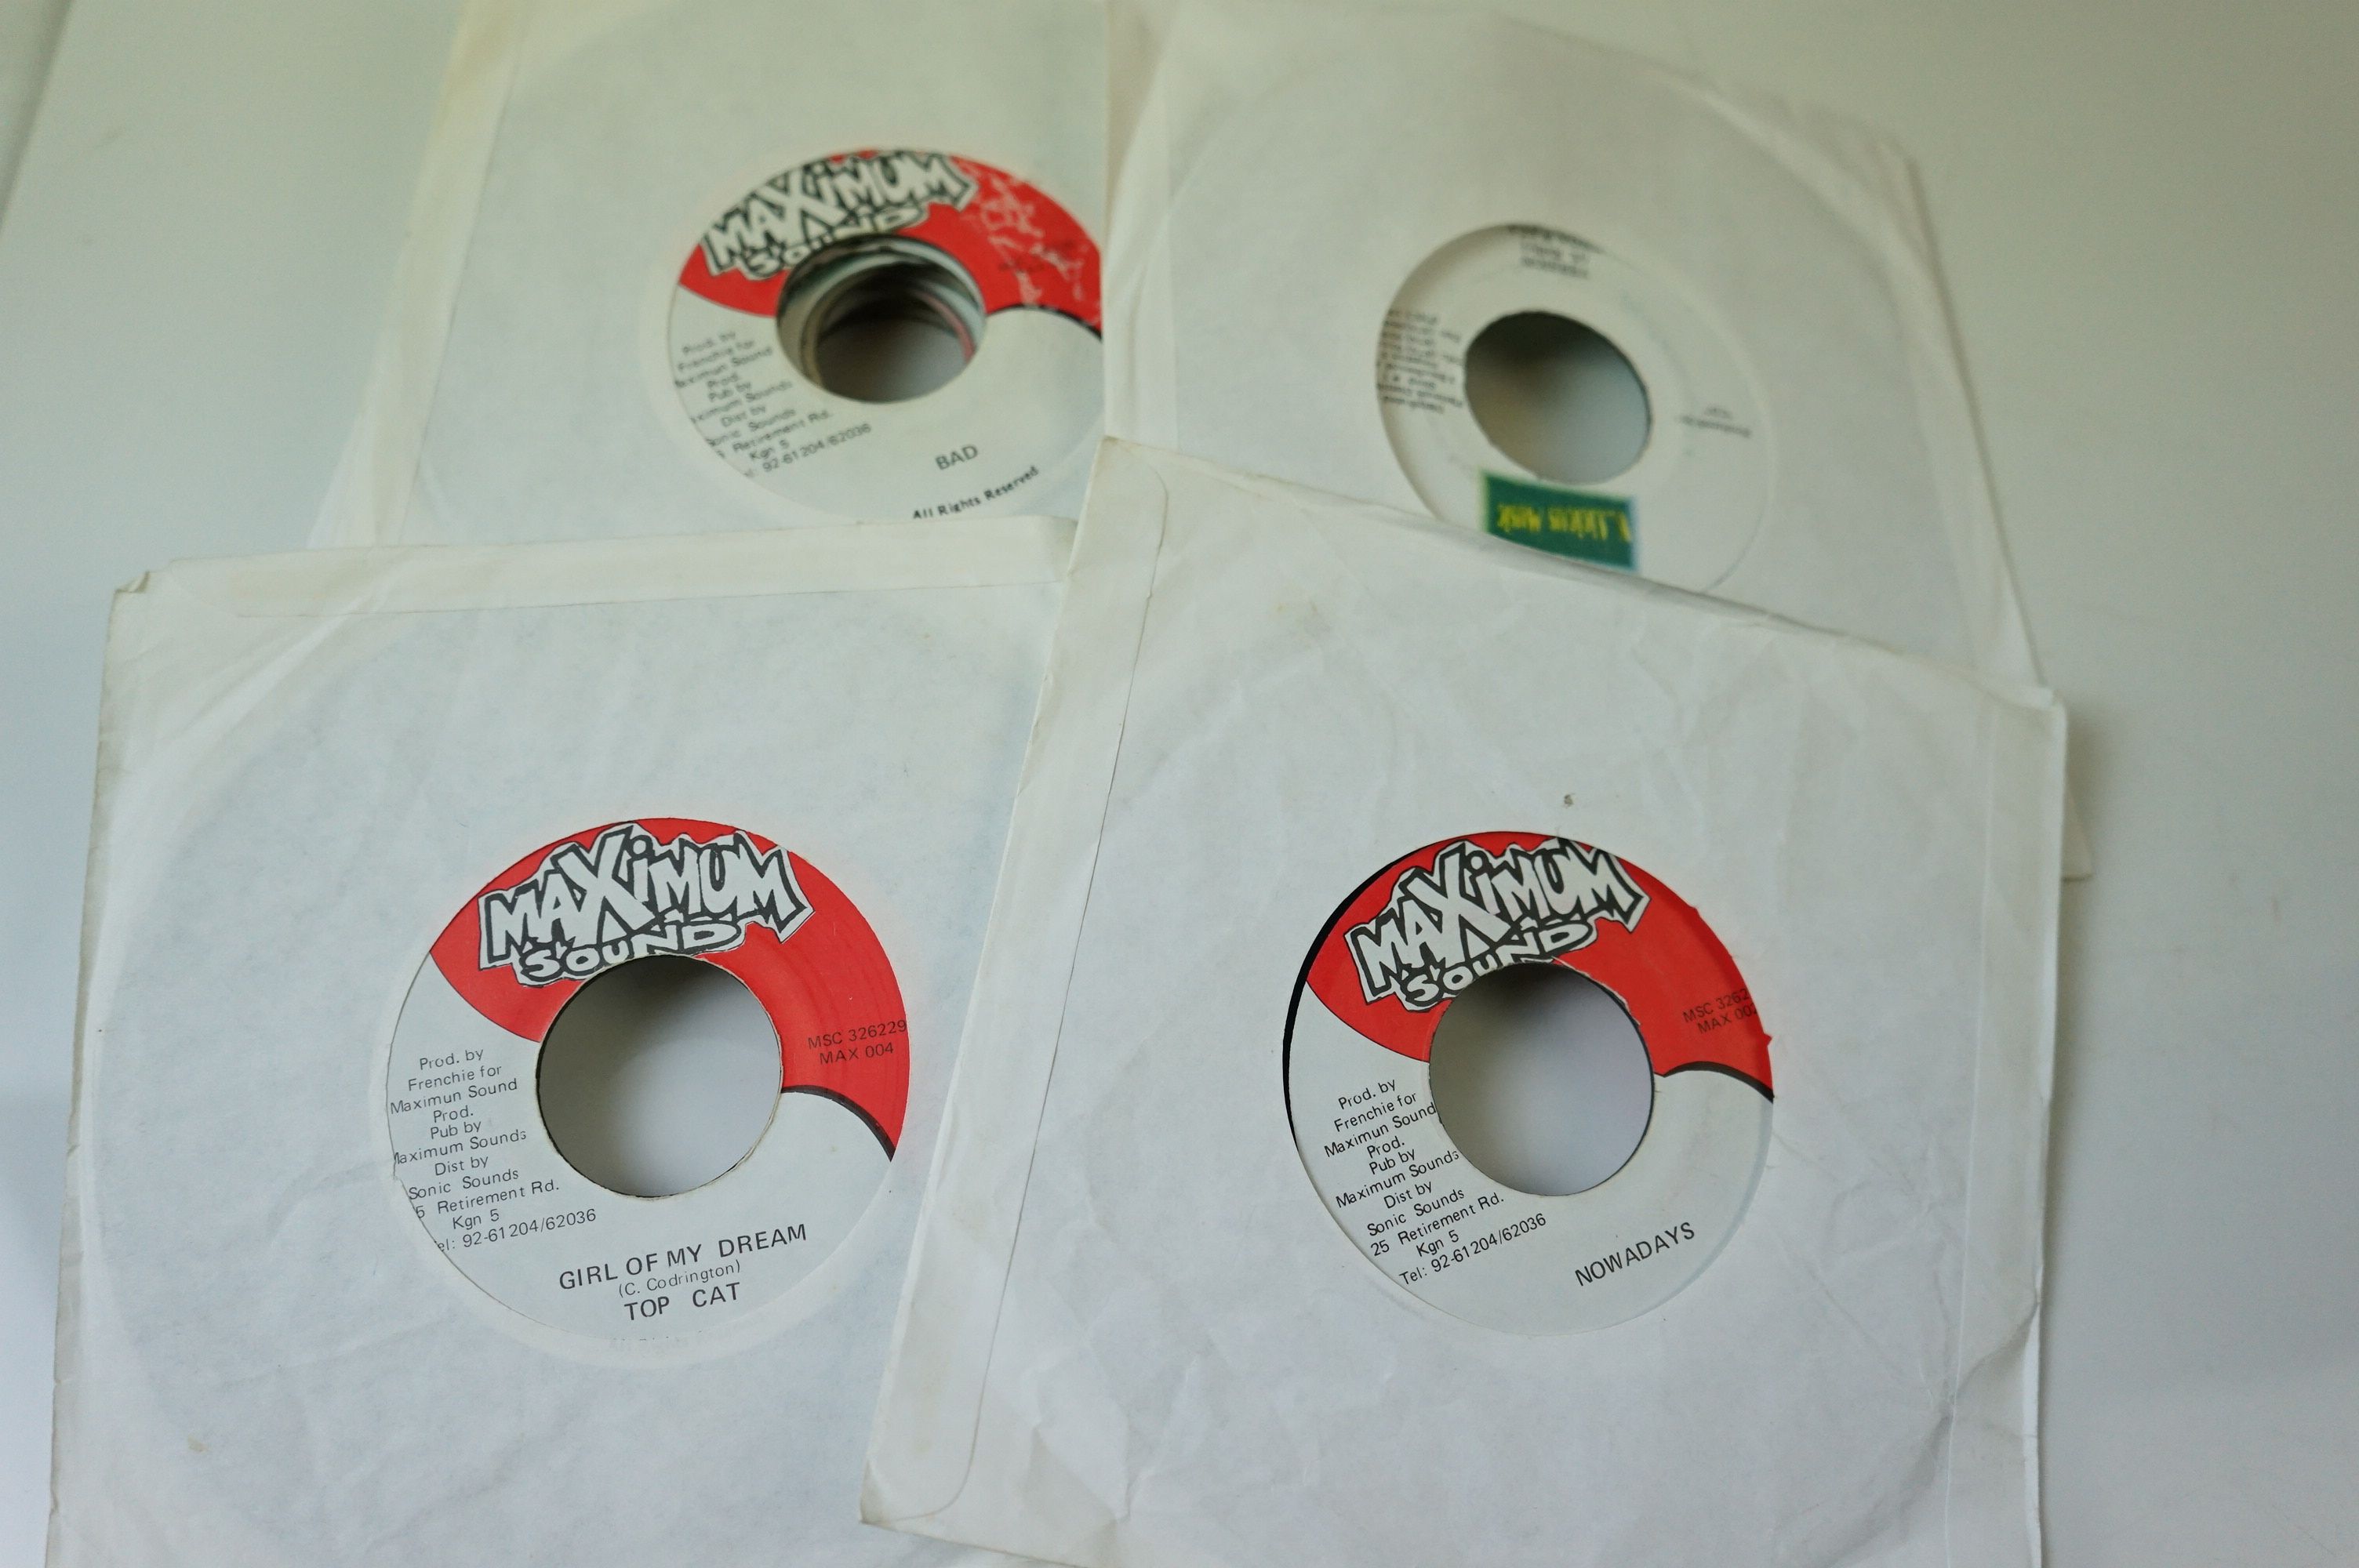 Vinyl - Reggae - Collection of approx 20 45's featuring various labels including Maximum Sound, - Image 3 of 4